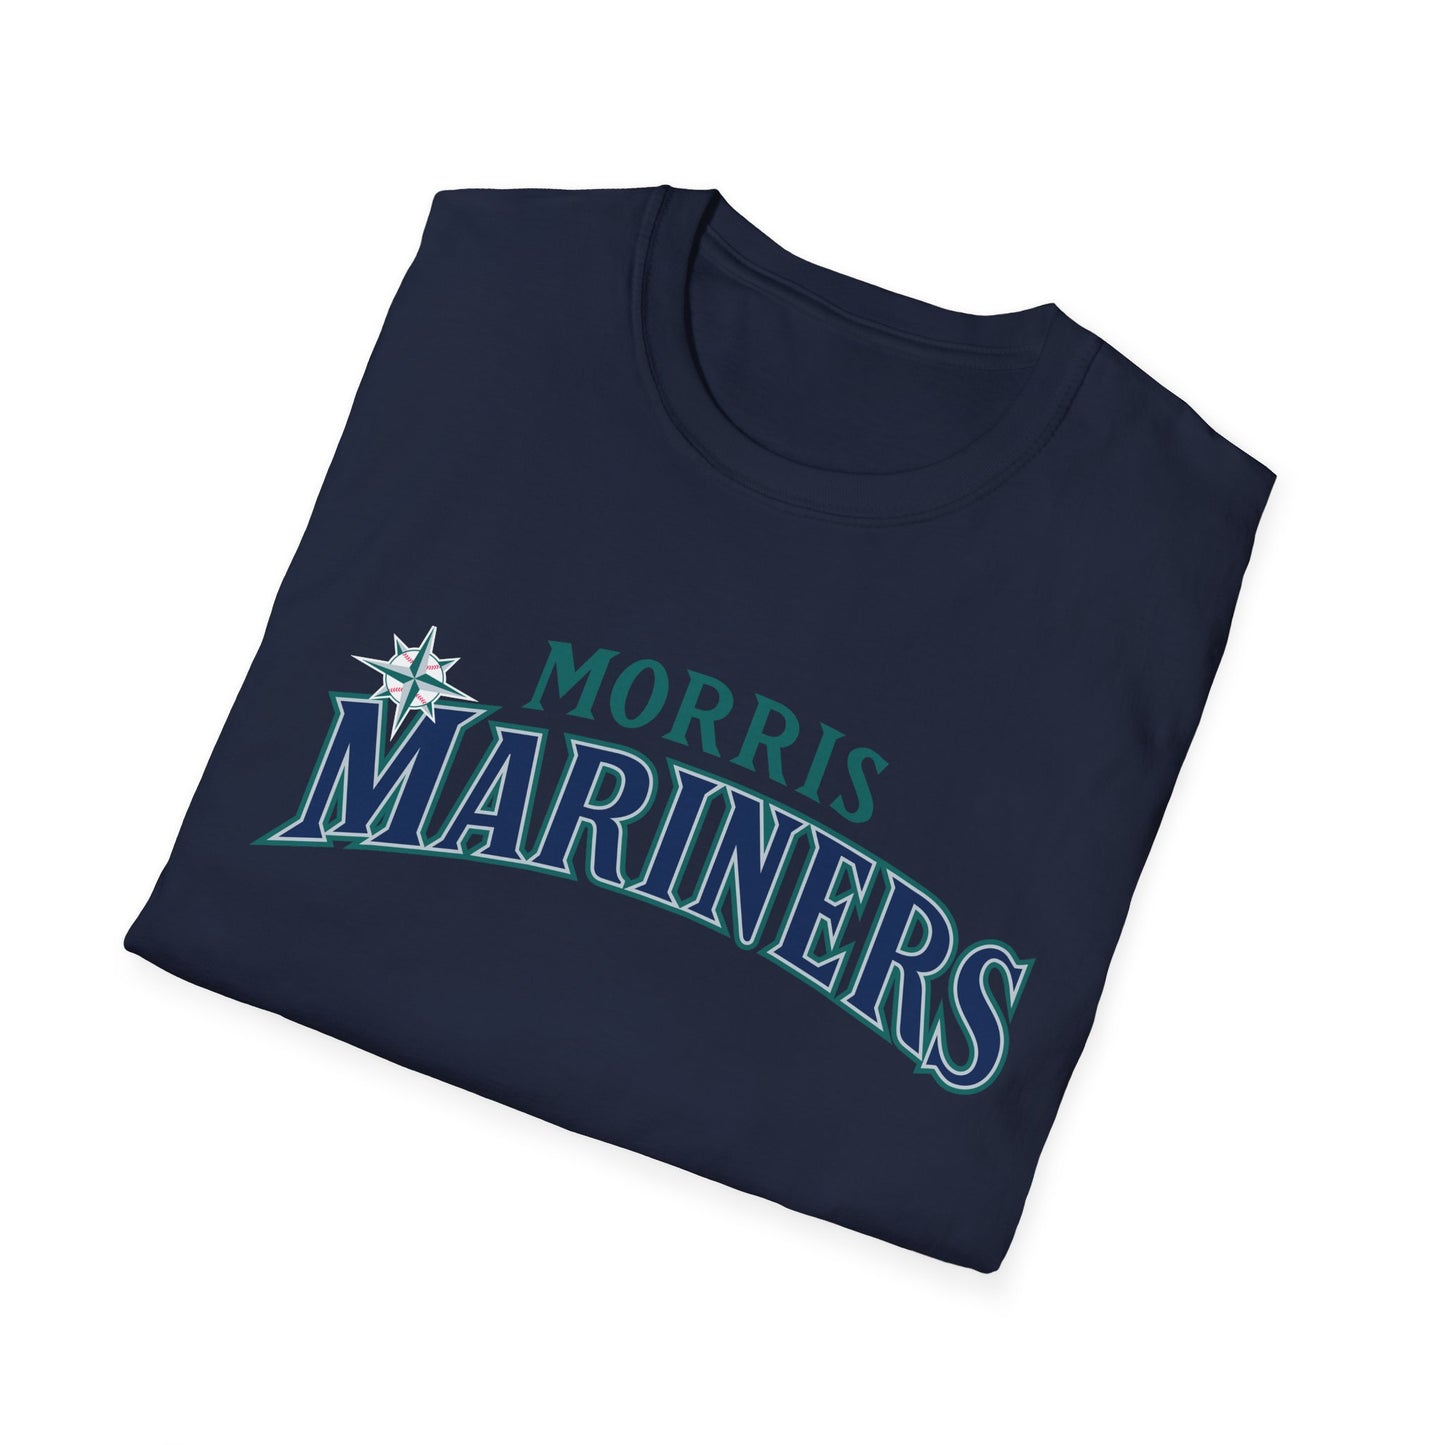 Morris Mariners Softstyle T-Shirt